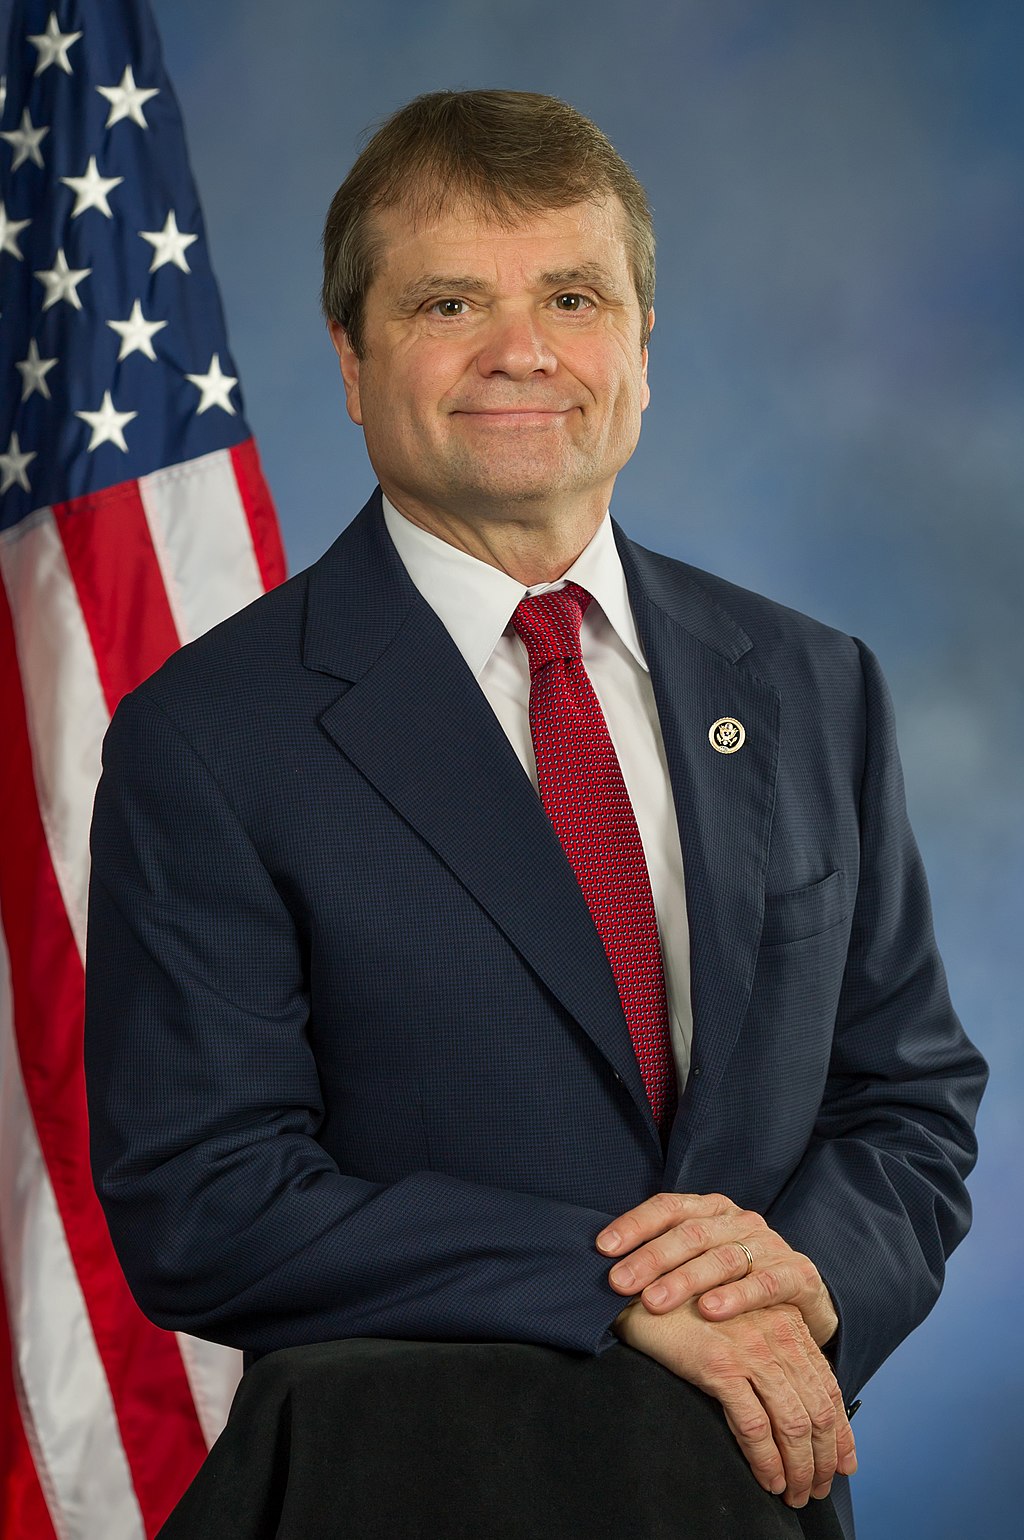 Rep. Mike Quigley